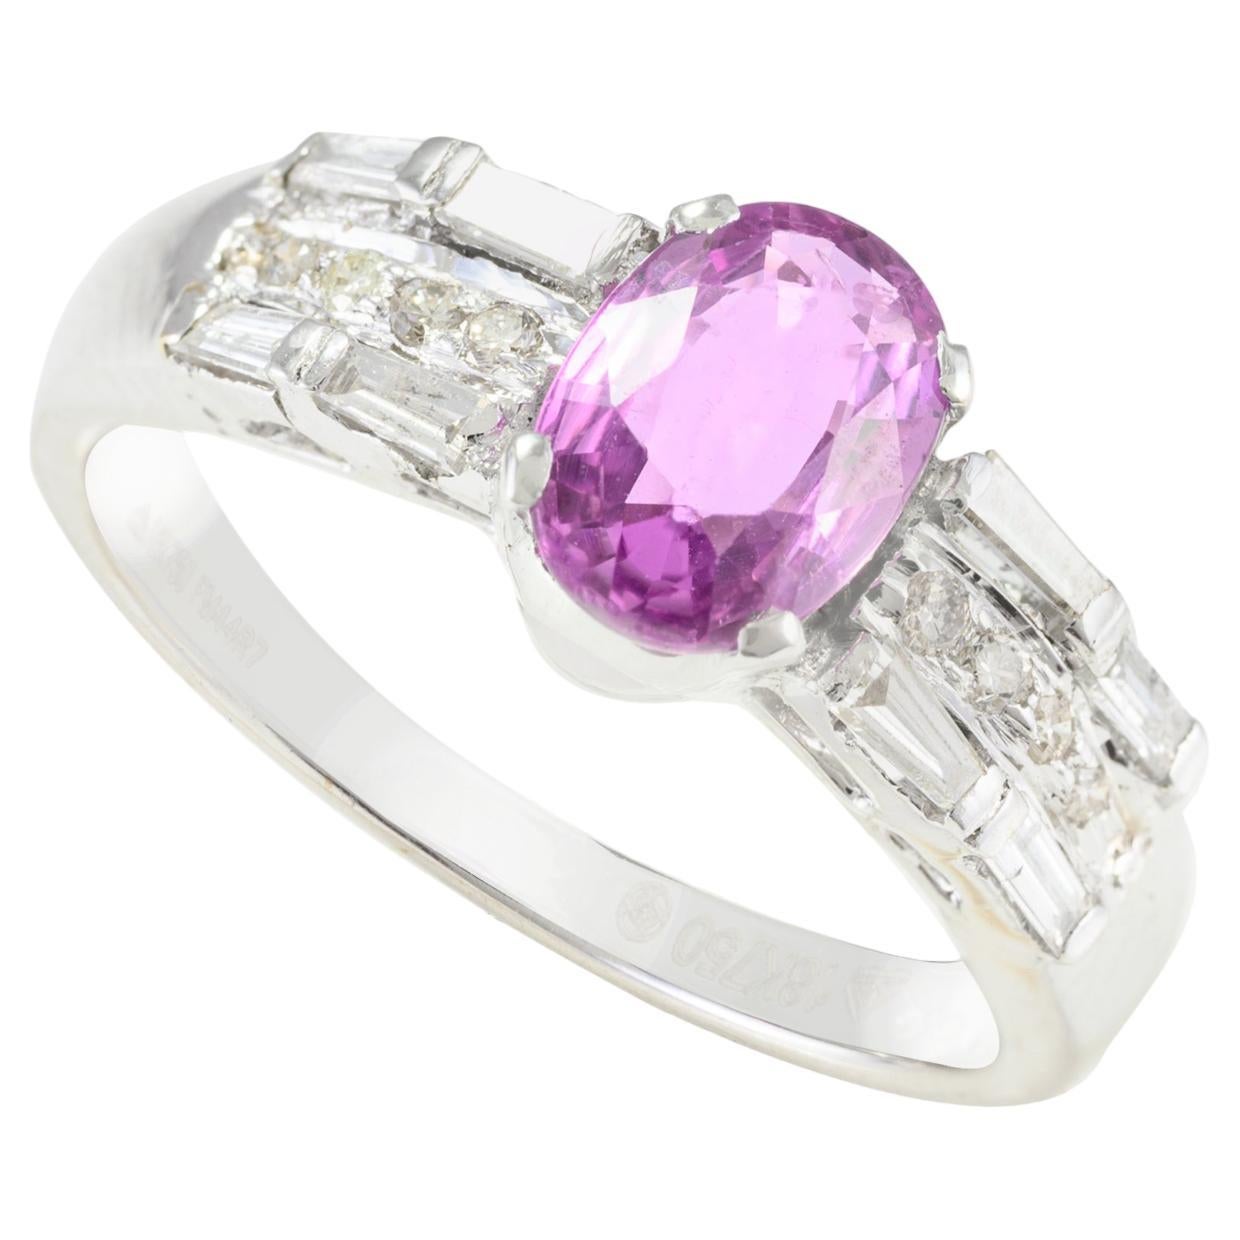 Oval Pink Sapphire Diamond Wedding Ring for Women in 18k White Gold